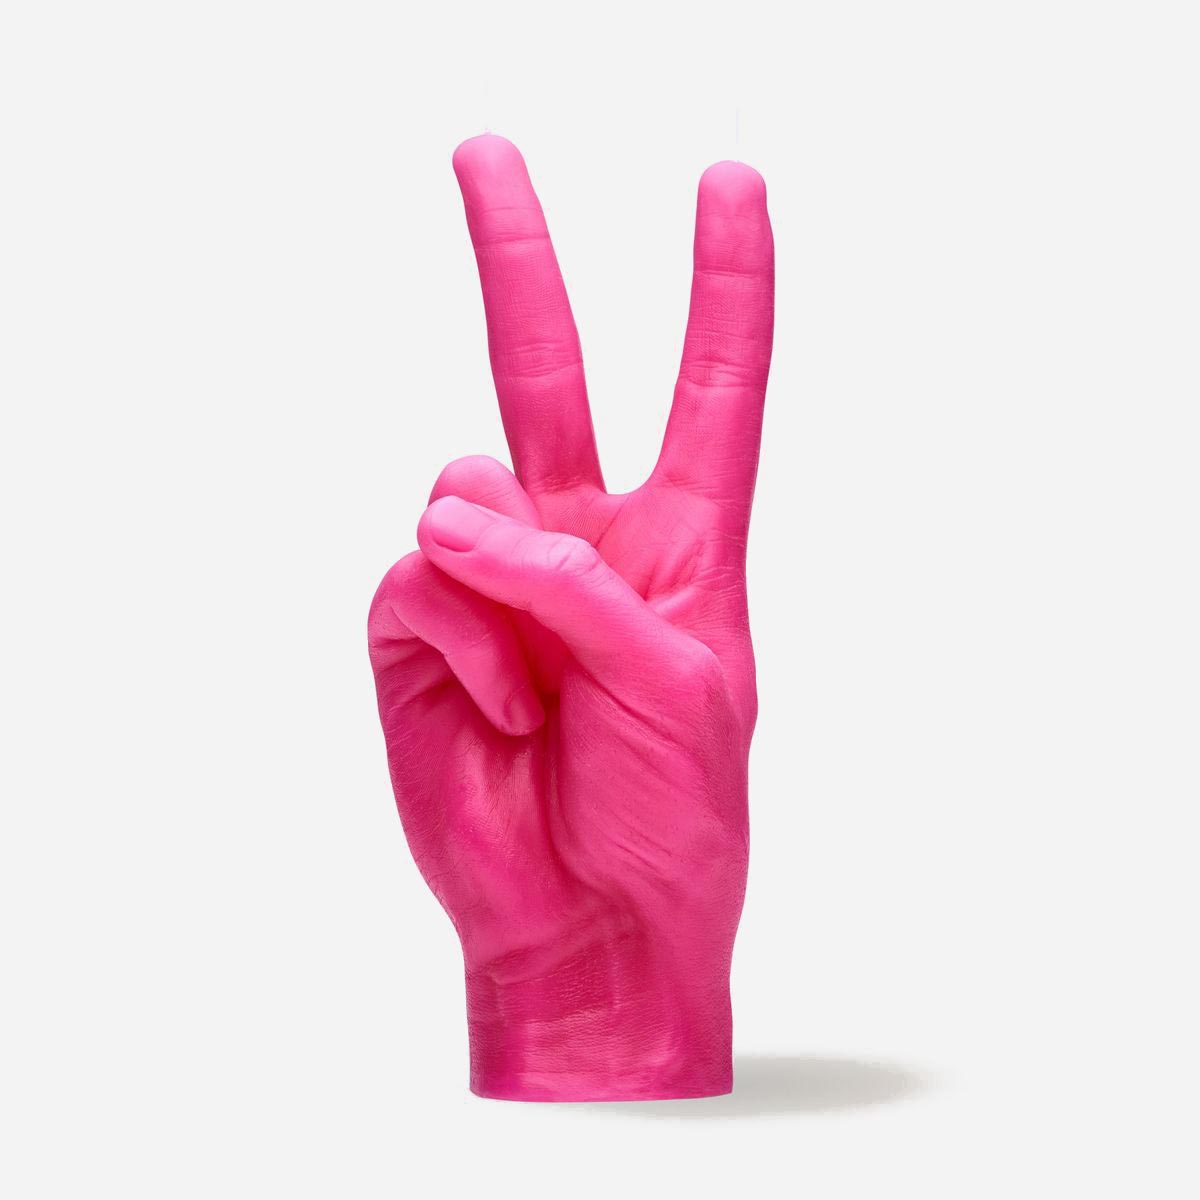 Candlehand Peace Hand Gesture Candle - Pink